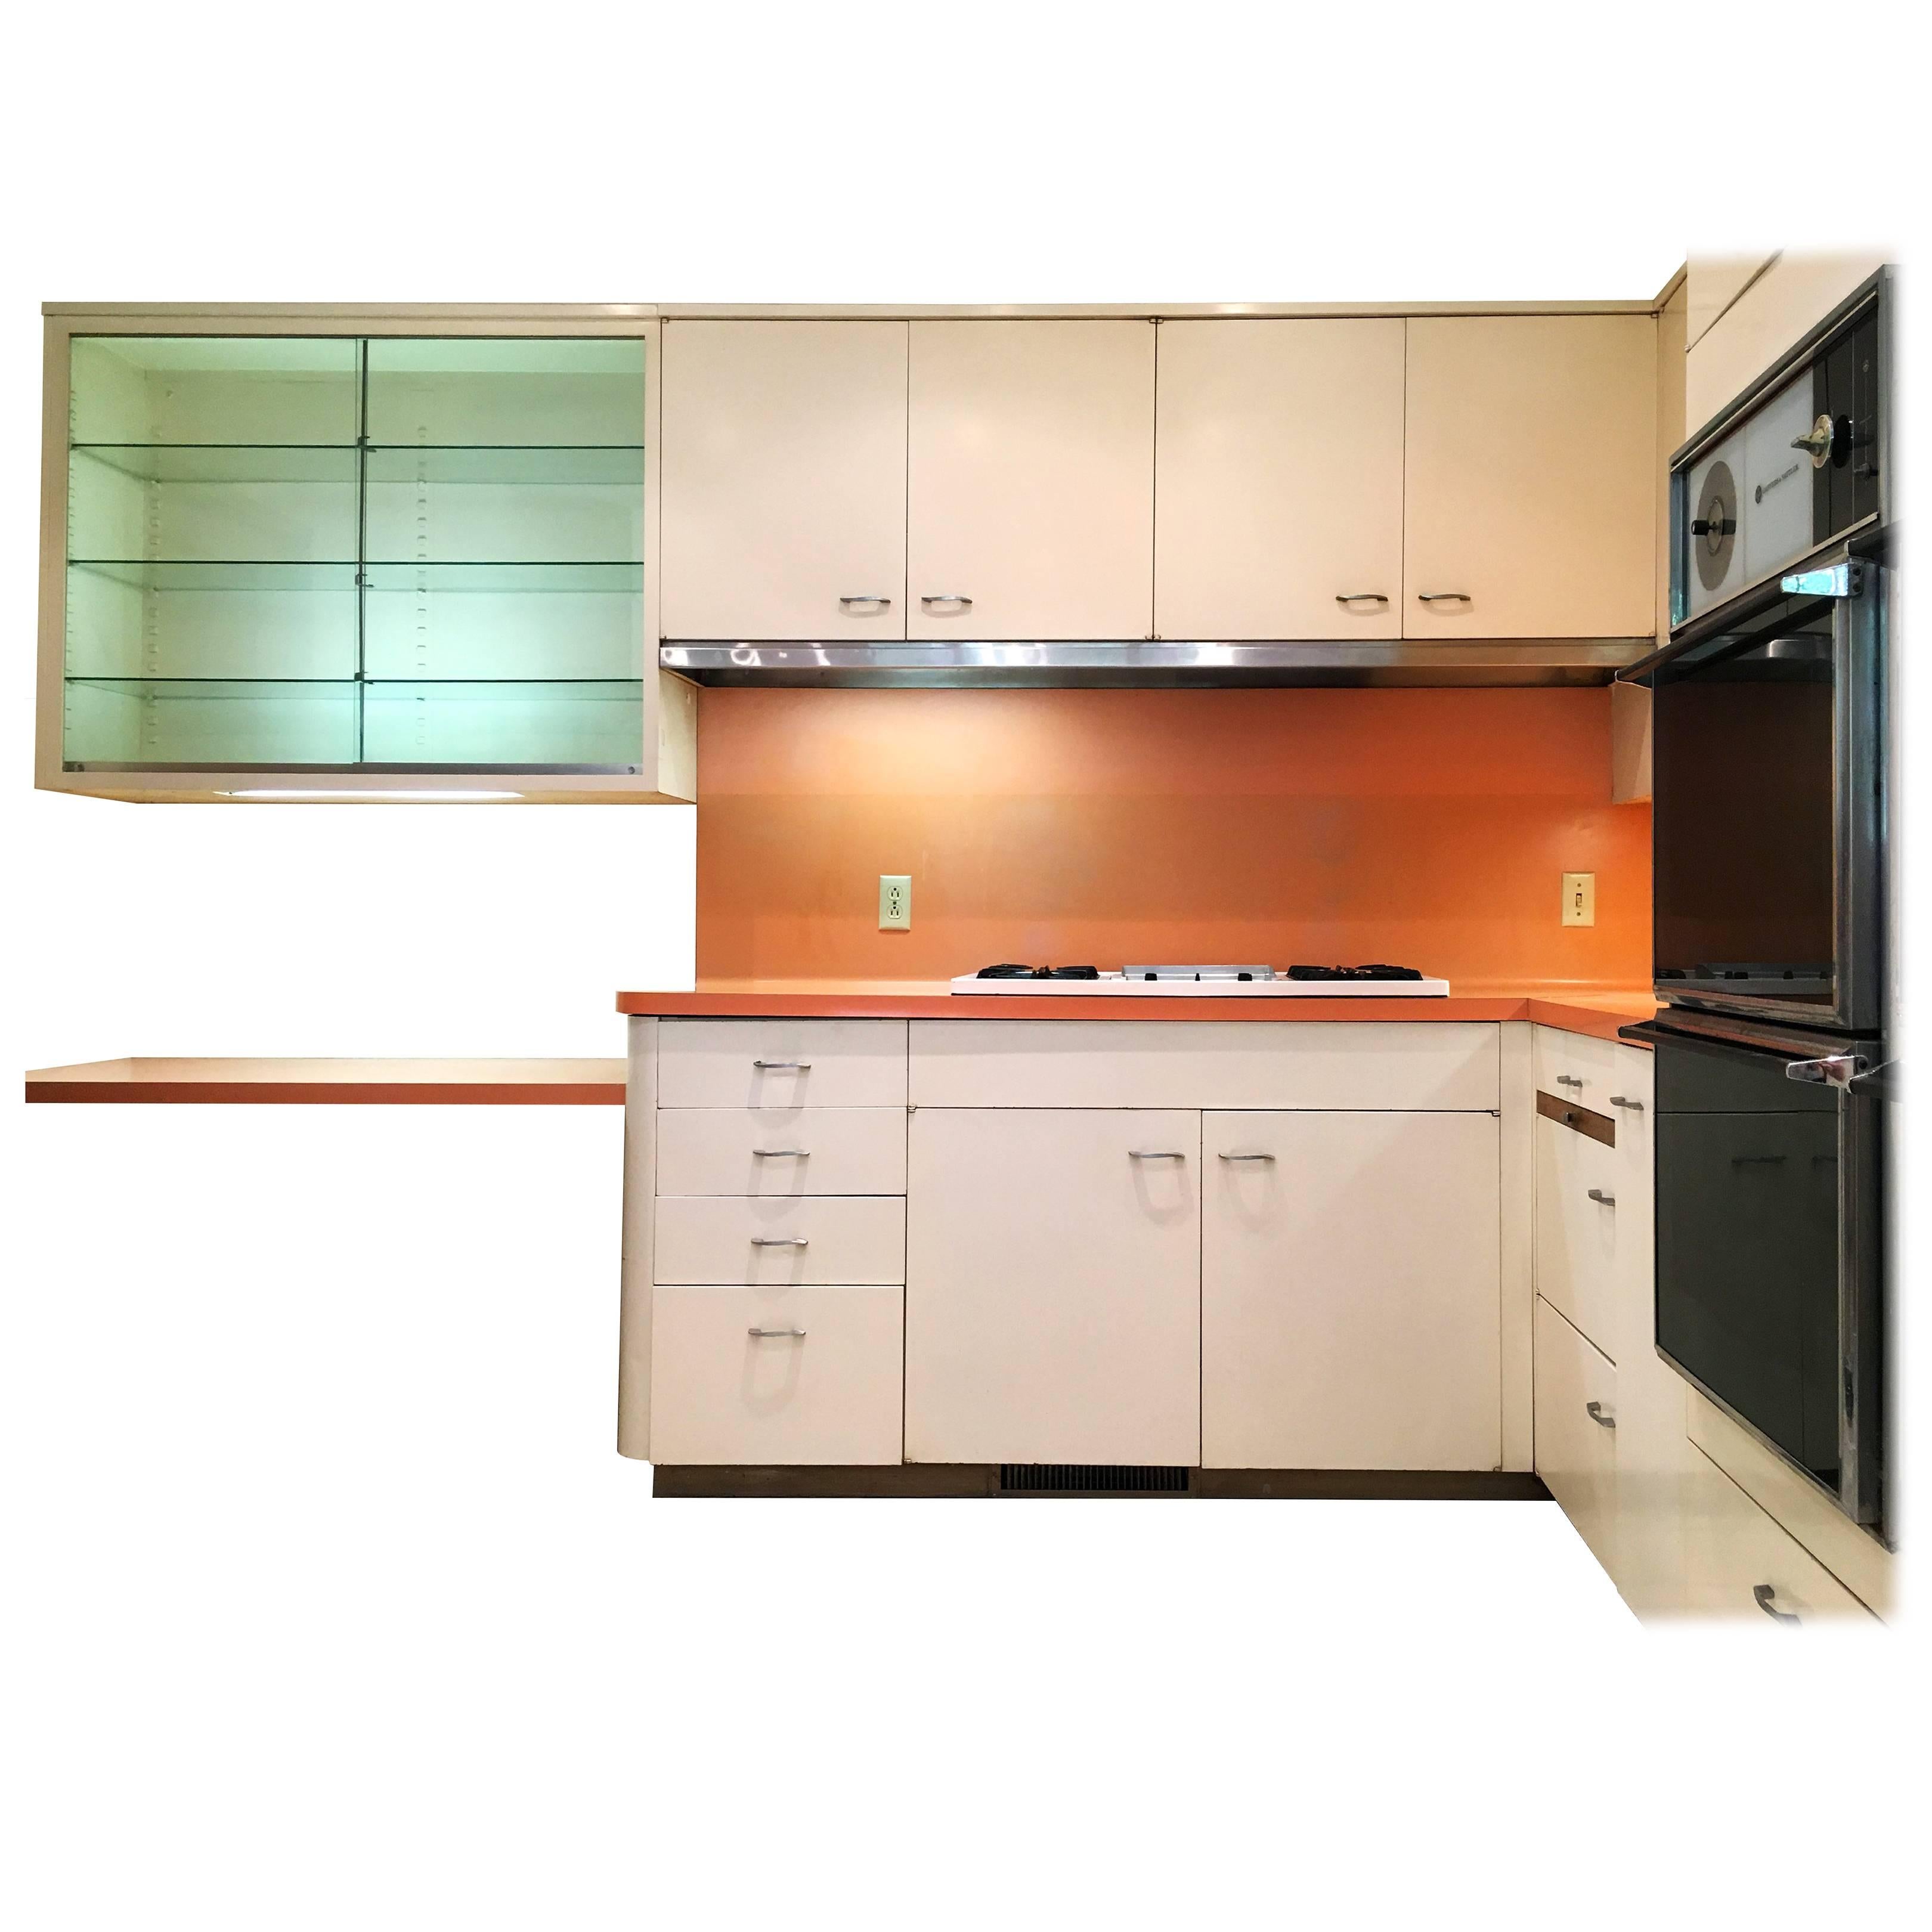 Entire St Charles 1960s Mid Century Modern Kitchen And Pantry